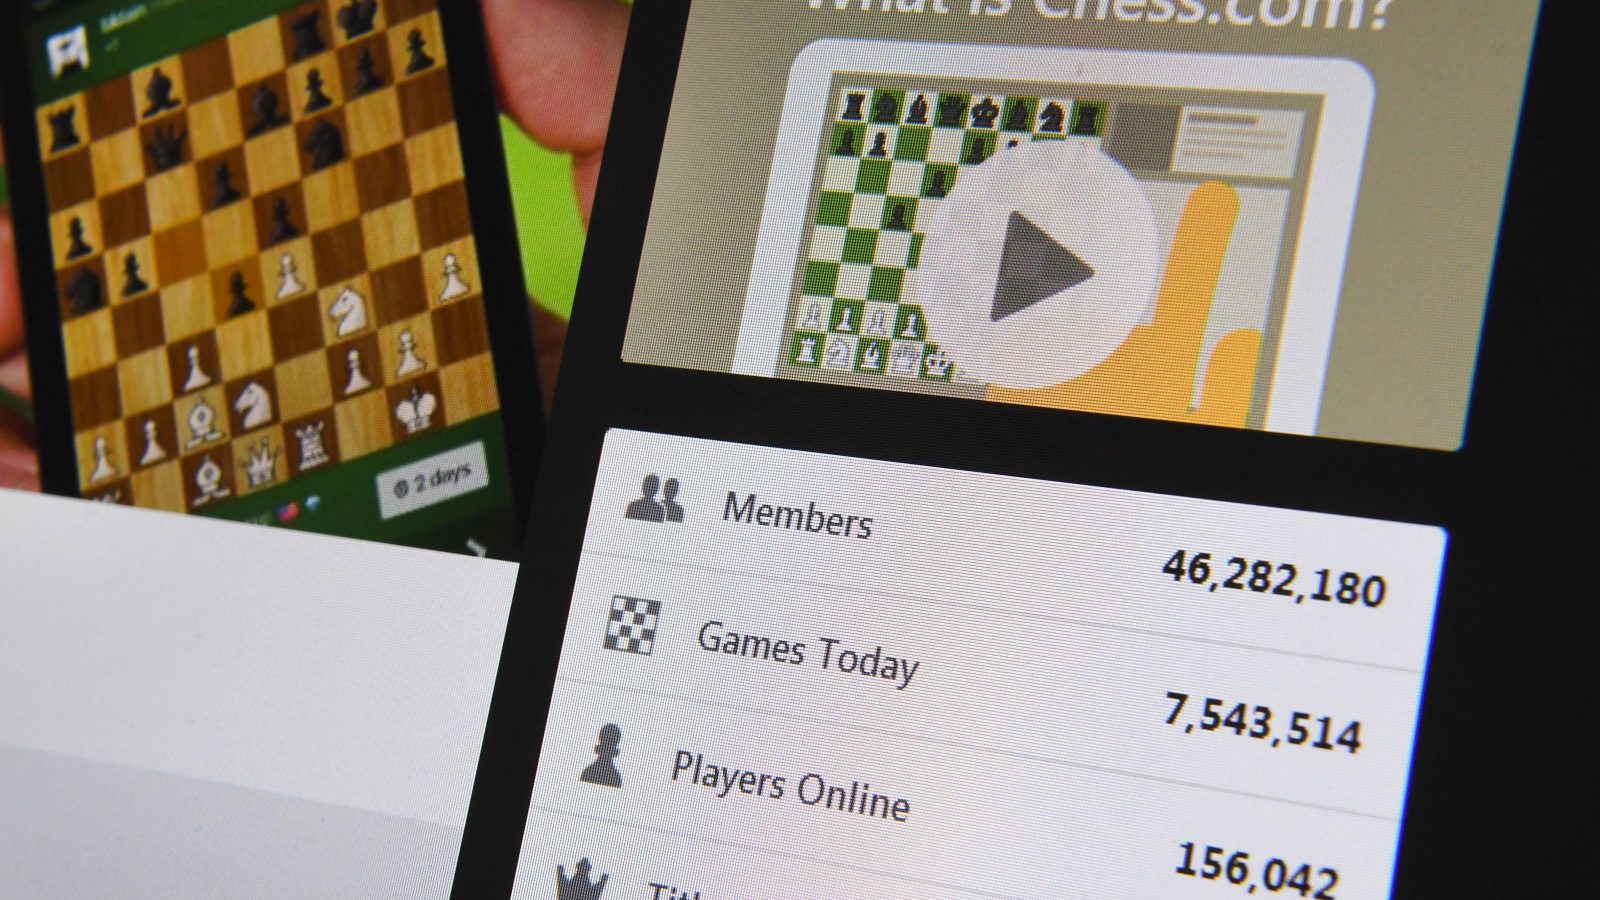 Online Chess Pro - Apps on Google Play